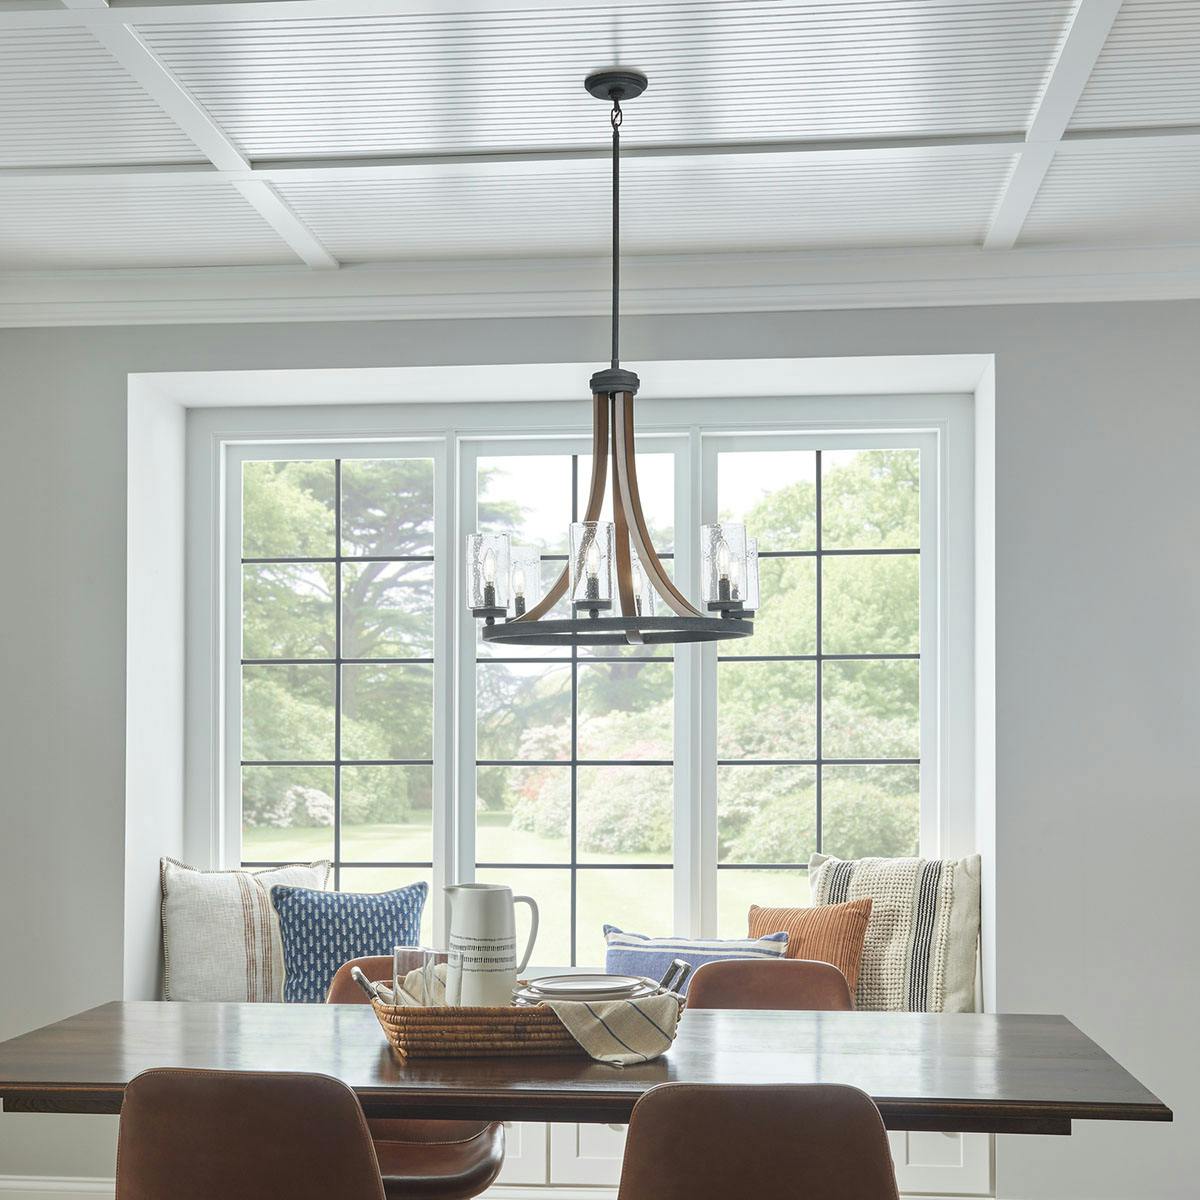 Day time dining room image featuring GrandBank chandelier 43193AUB